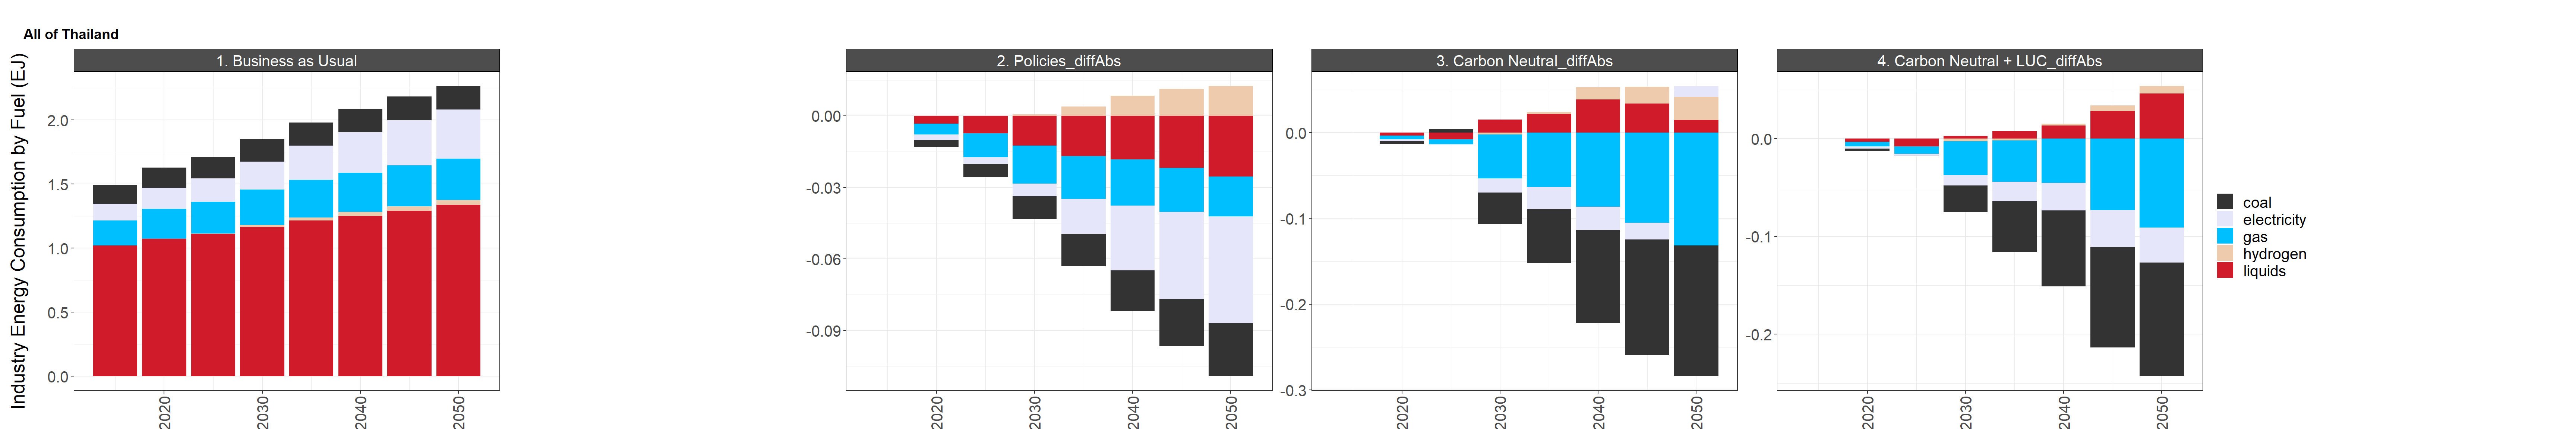 Difference in national industrial GHG emissions and final energy consumption by fuel between the reference scenario (left) and the low and high policy scenarios (right)